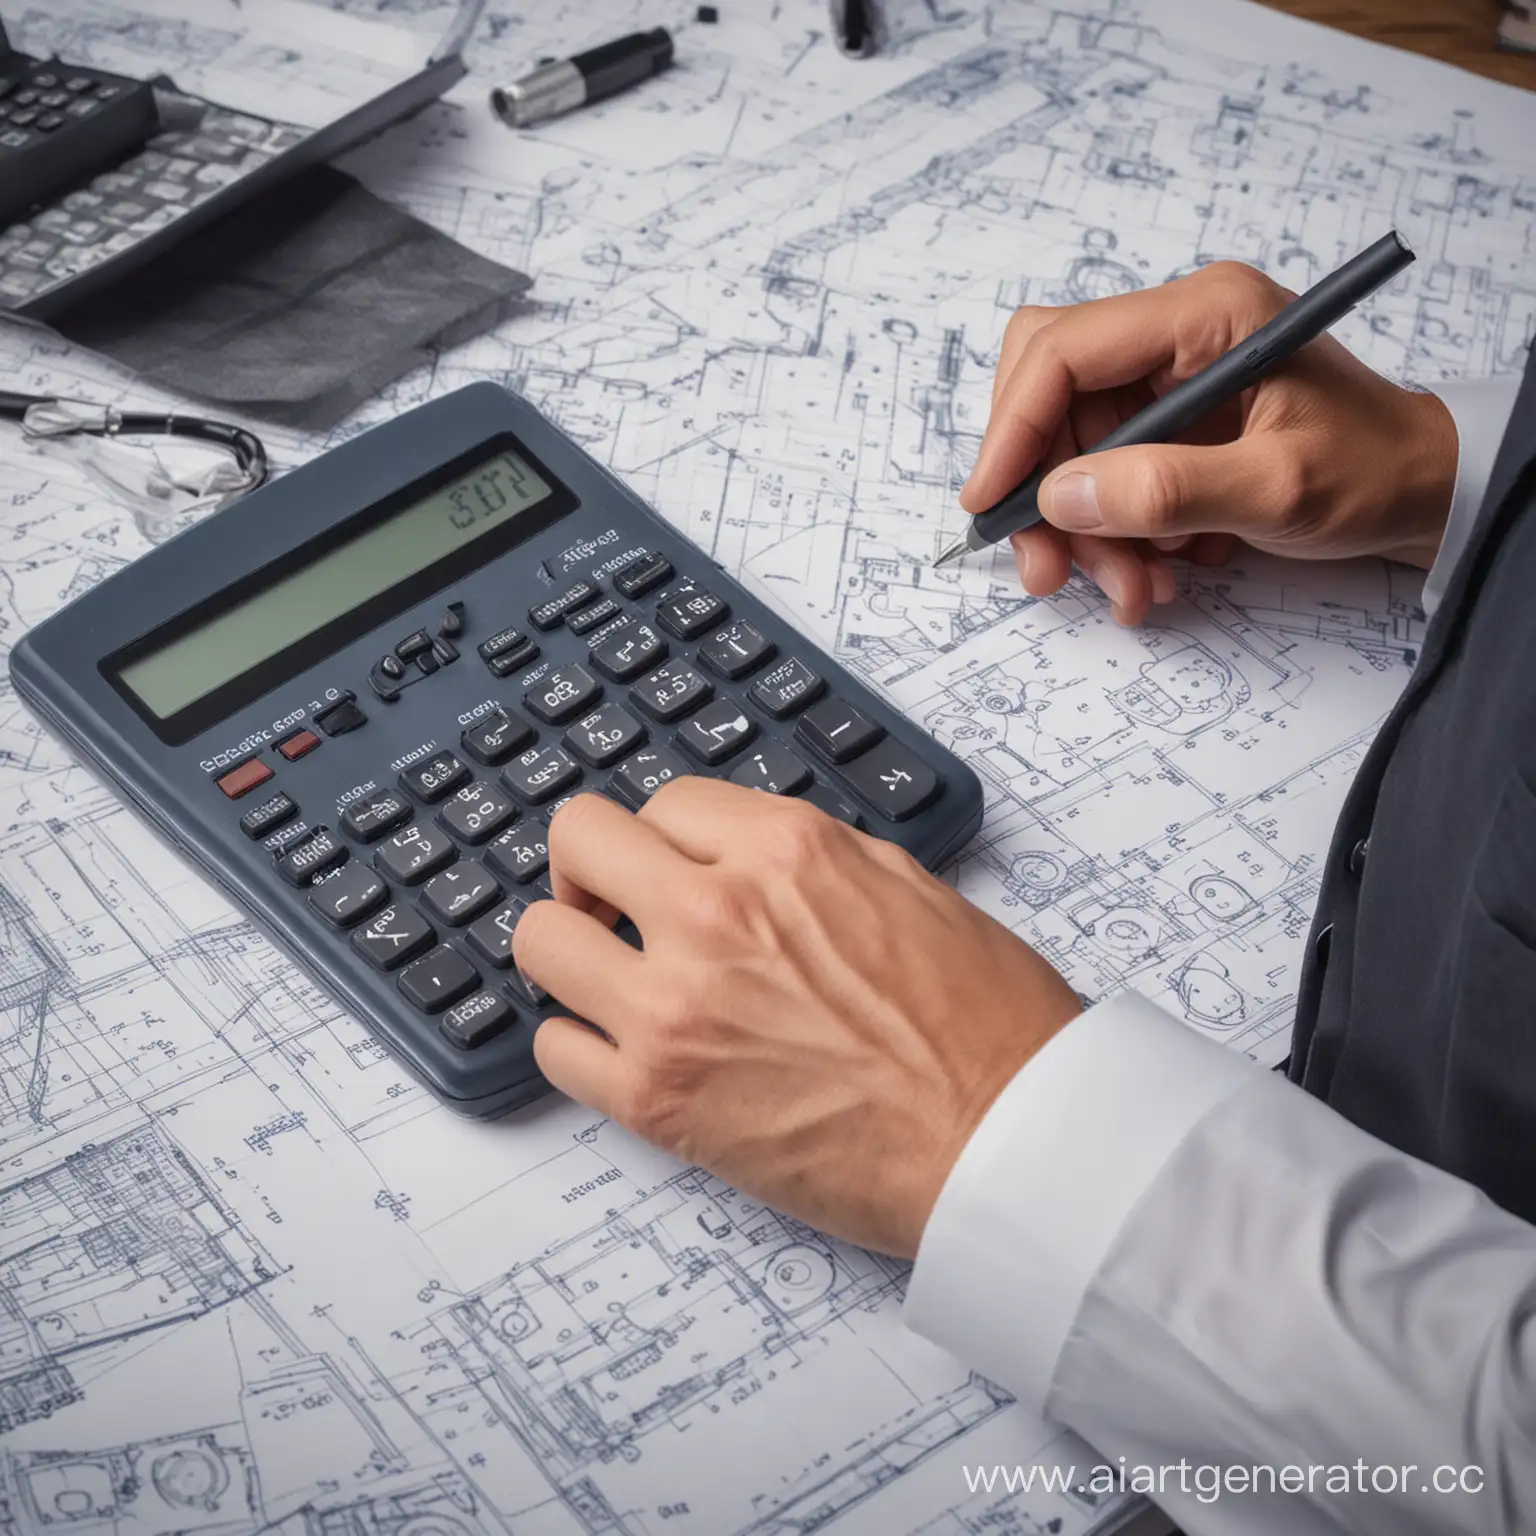 Male-Engineer-Using-Calculator-with-Security-Equipment-on-Blueprint